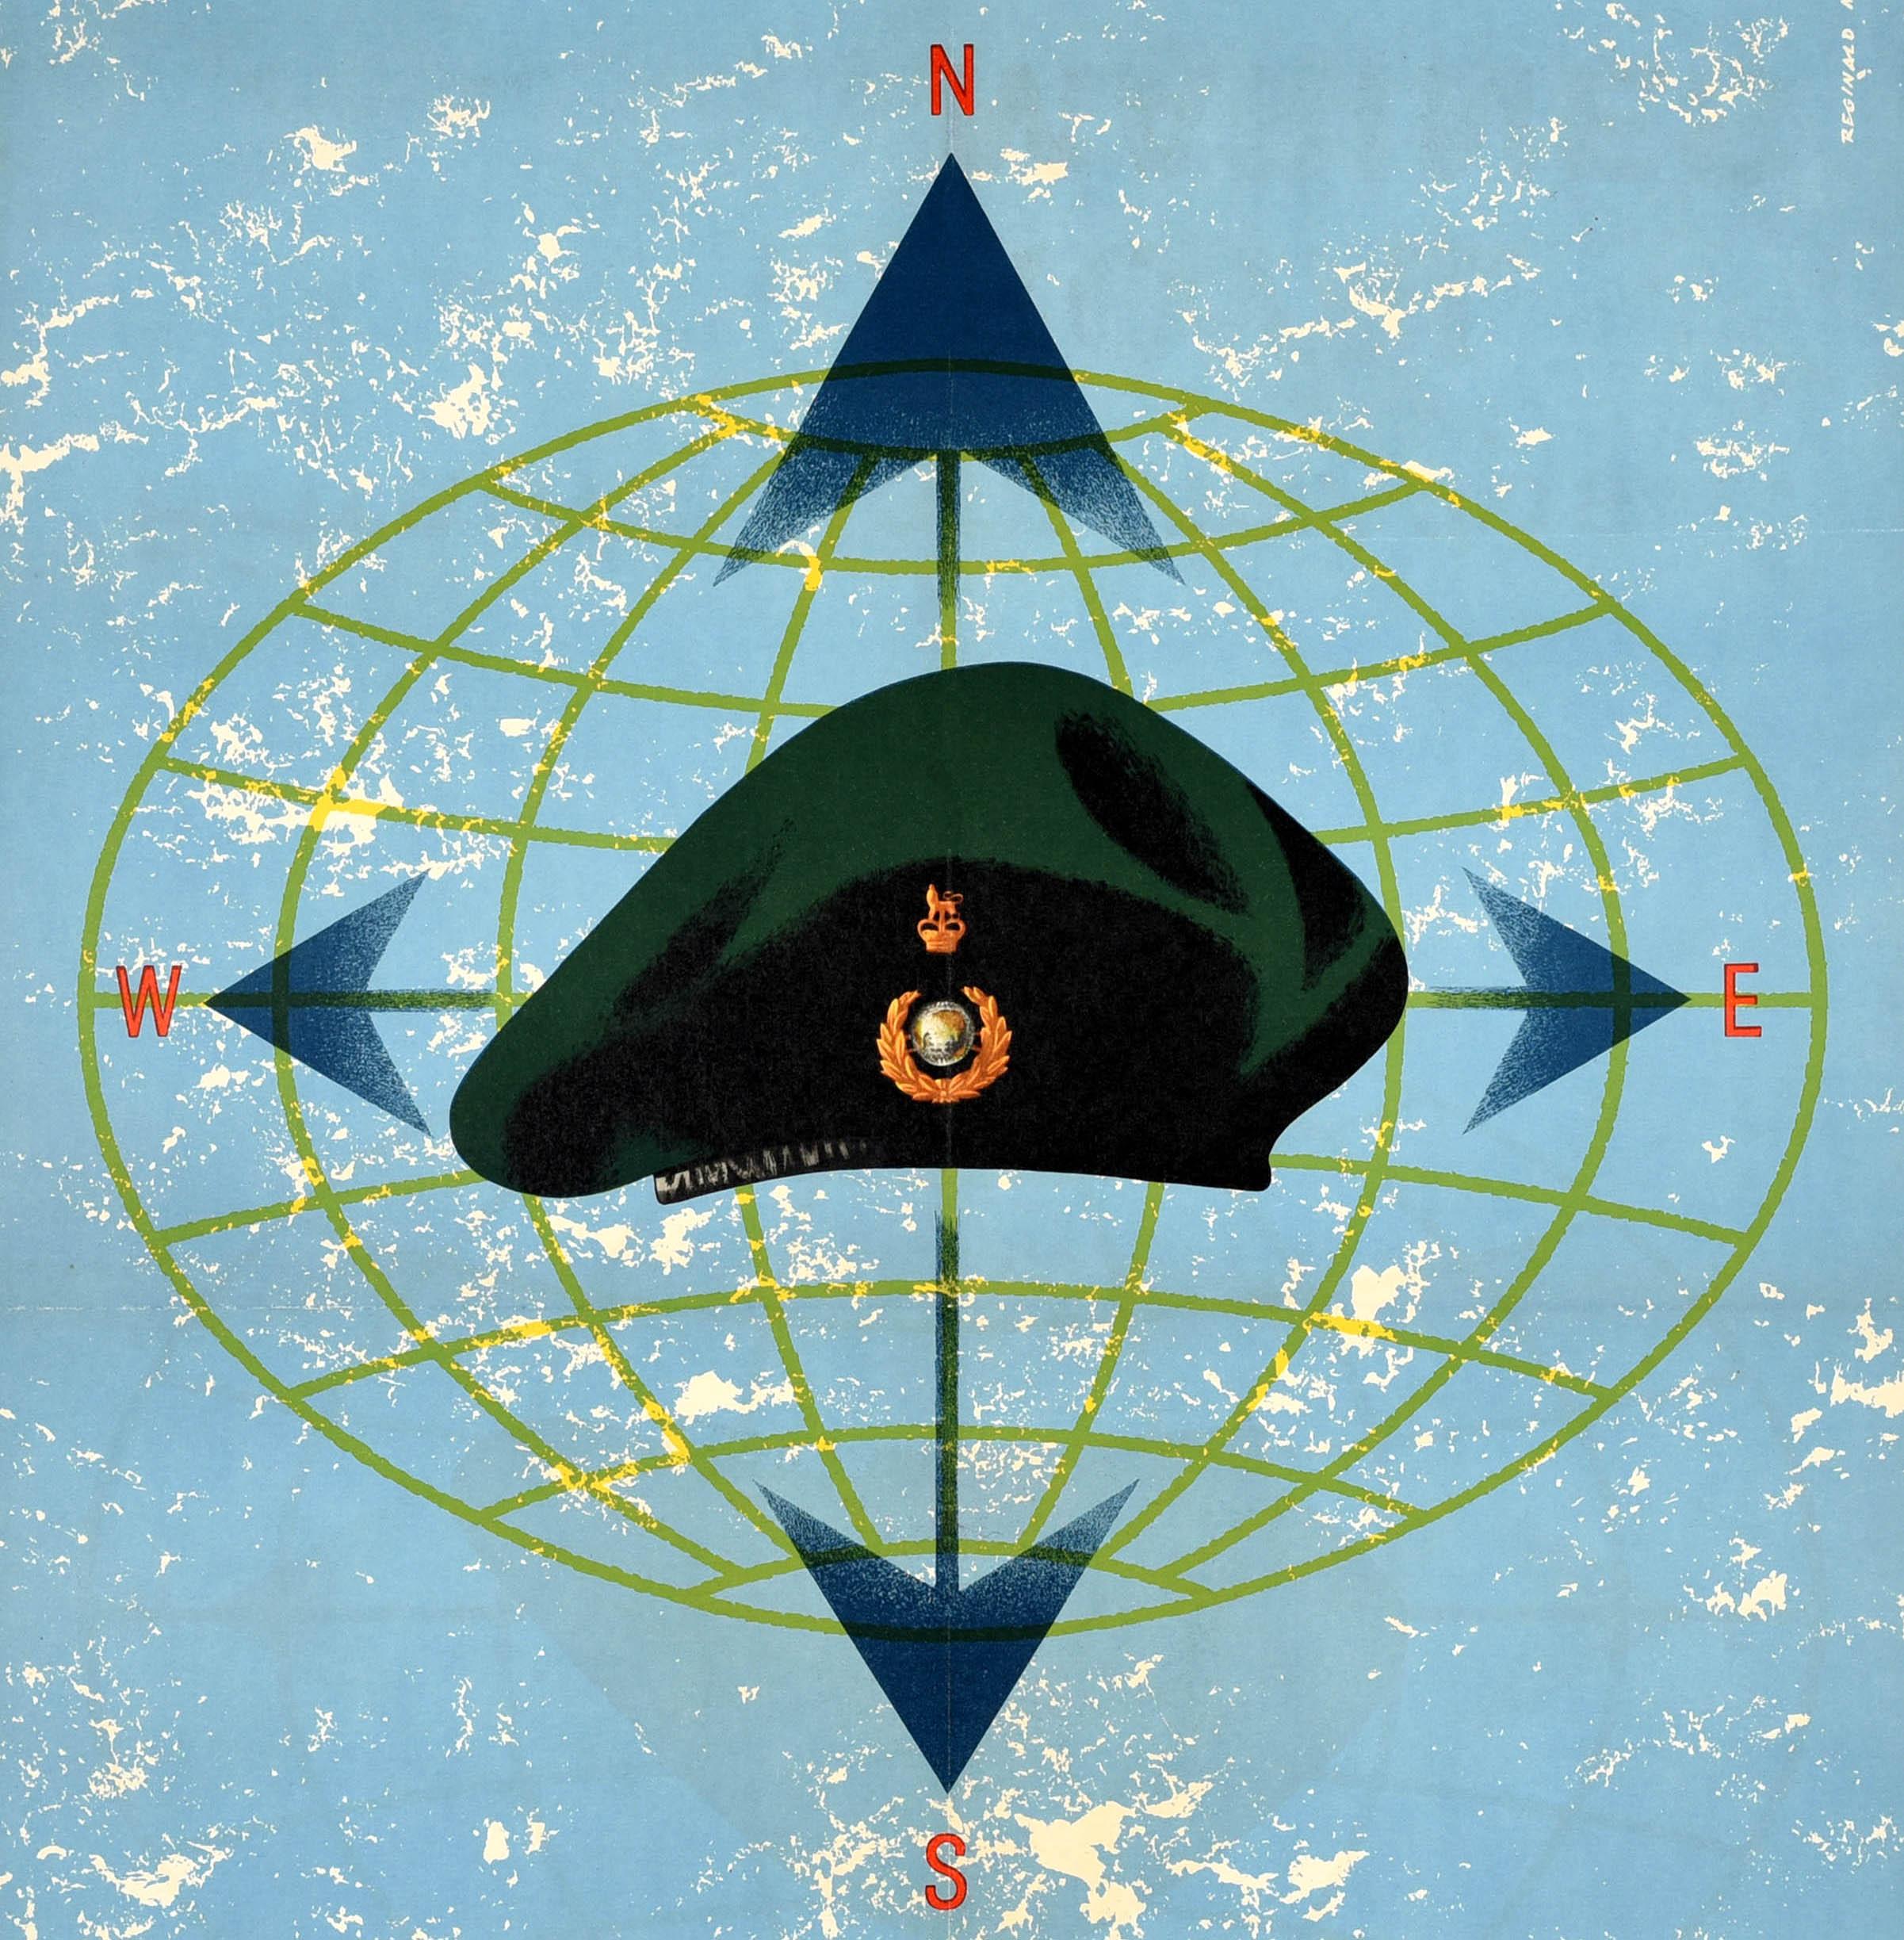 Original vintage military recruitment poster for Britain's Commandos... The Royal Marines featuring artwork by the British poster designer Reginald Mount (1906-1979) depicting a green beret with a royal crown badge on top of a compass and globe